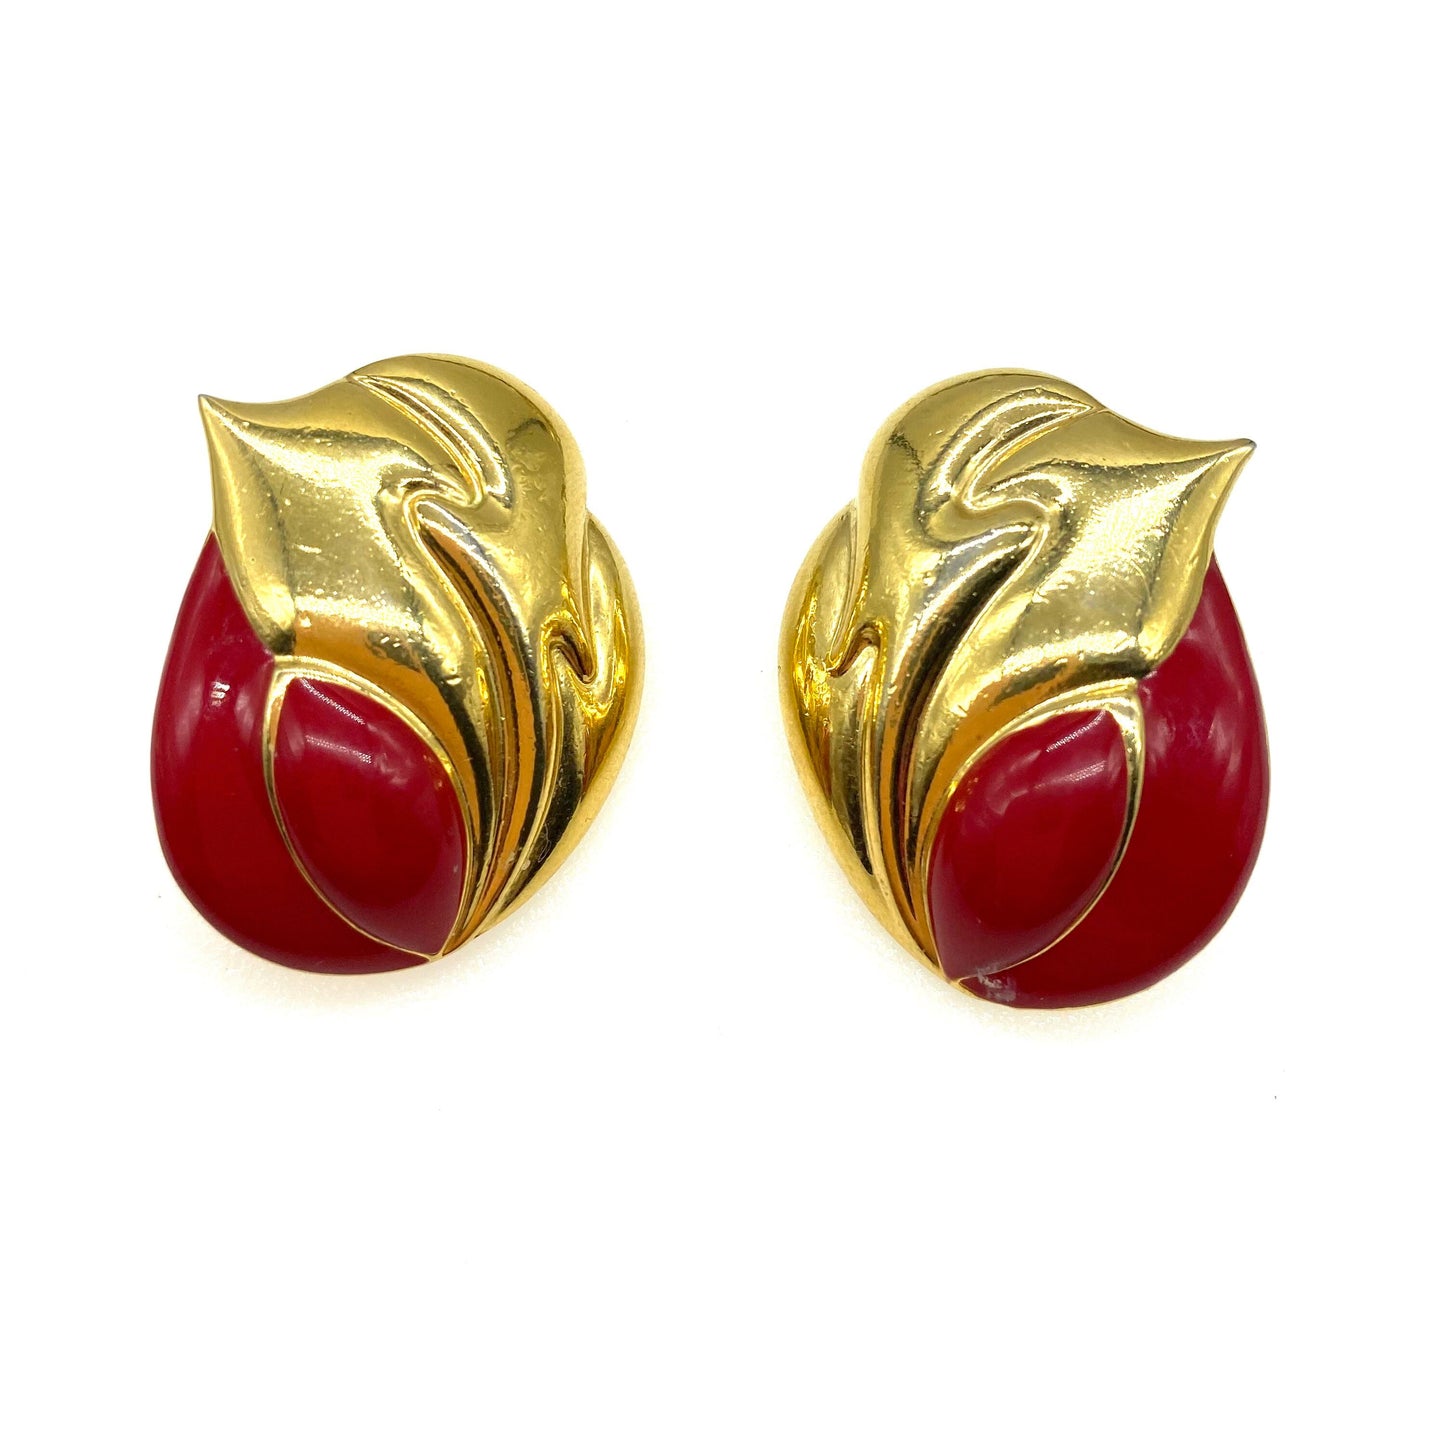 Bergdorf Goodman Red Enamel Abstract Pierced Earrings with Replacement Backs